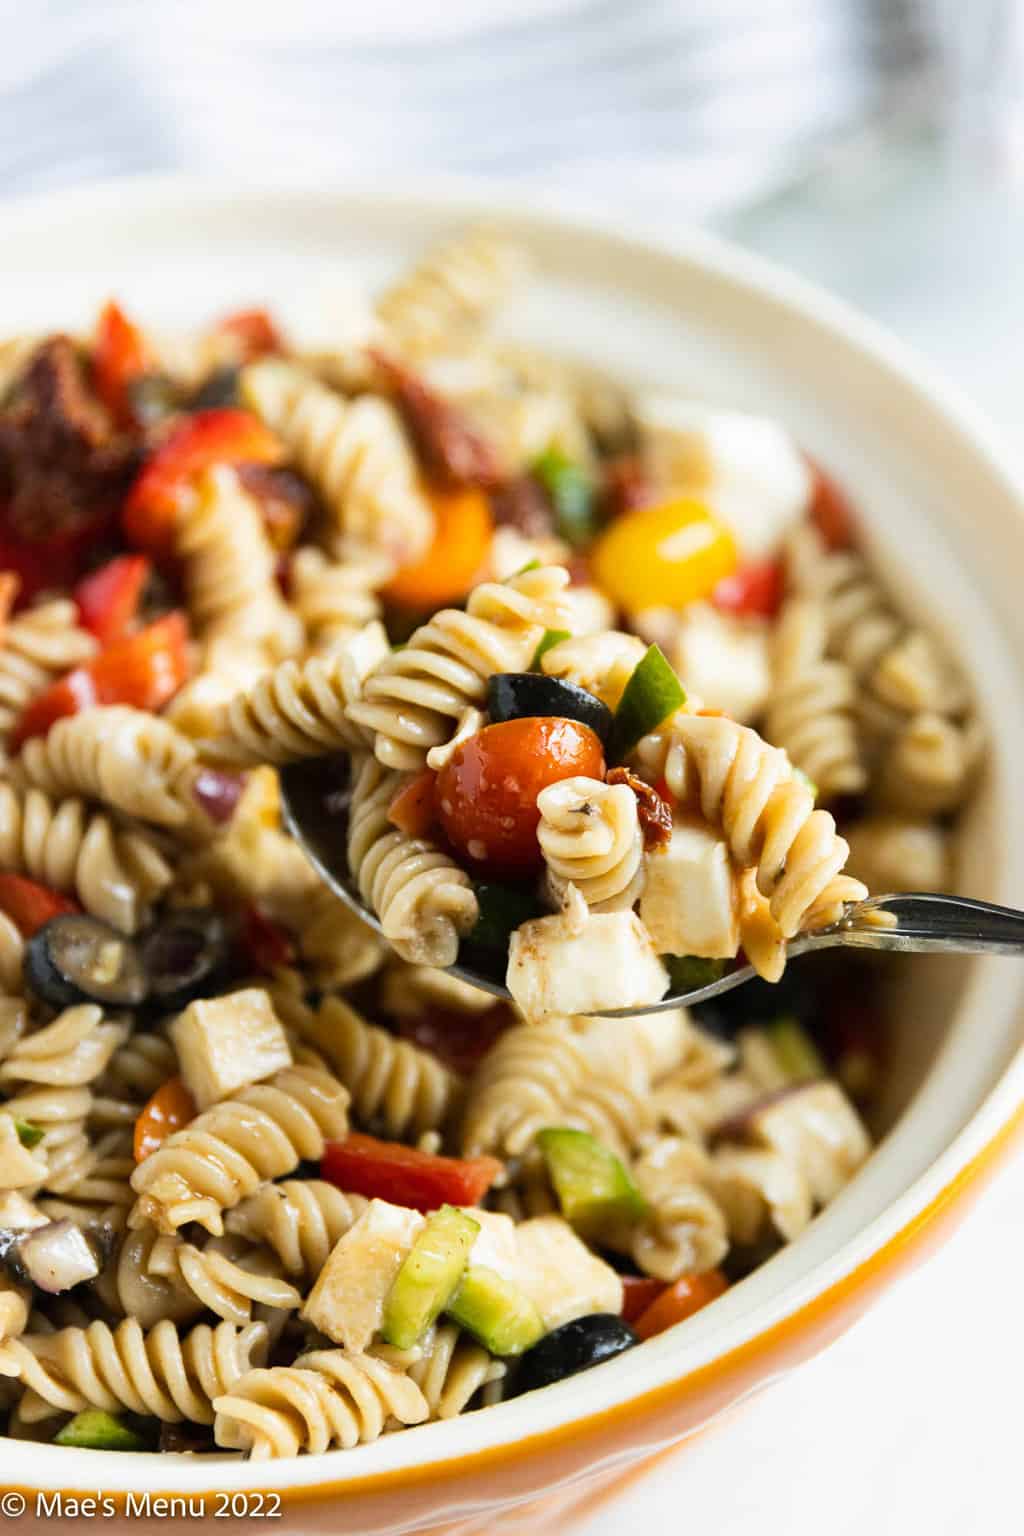 An up-close shot of a spoon taking a scoop of the pasta salad from the bowl.